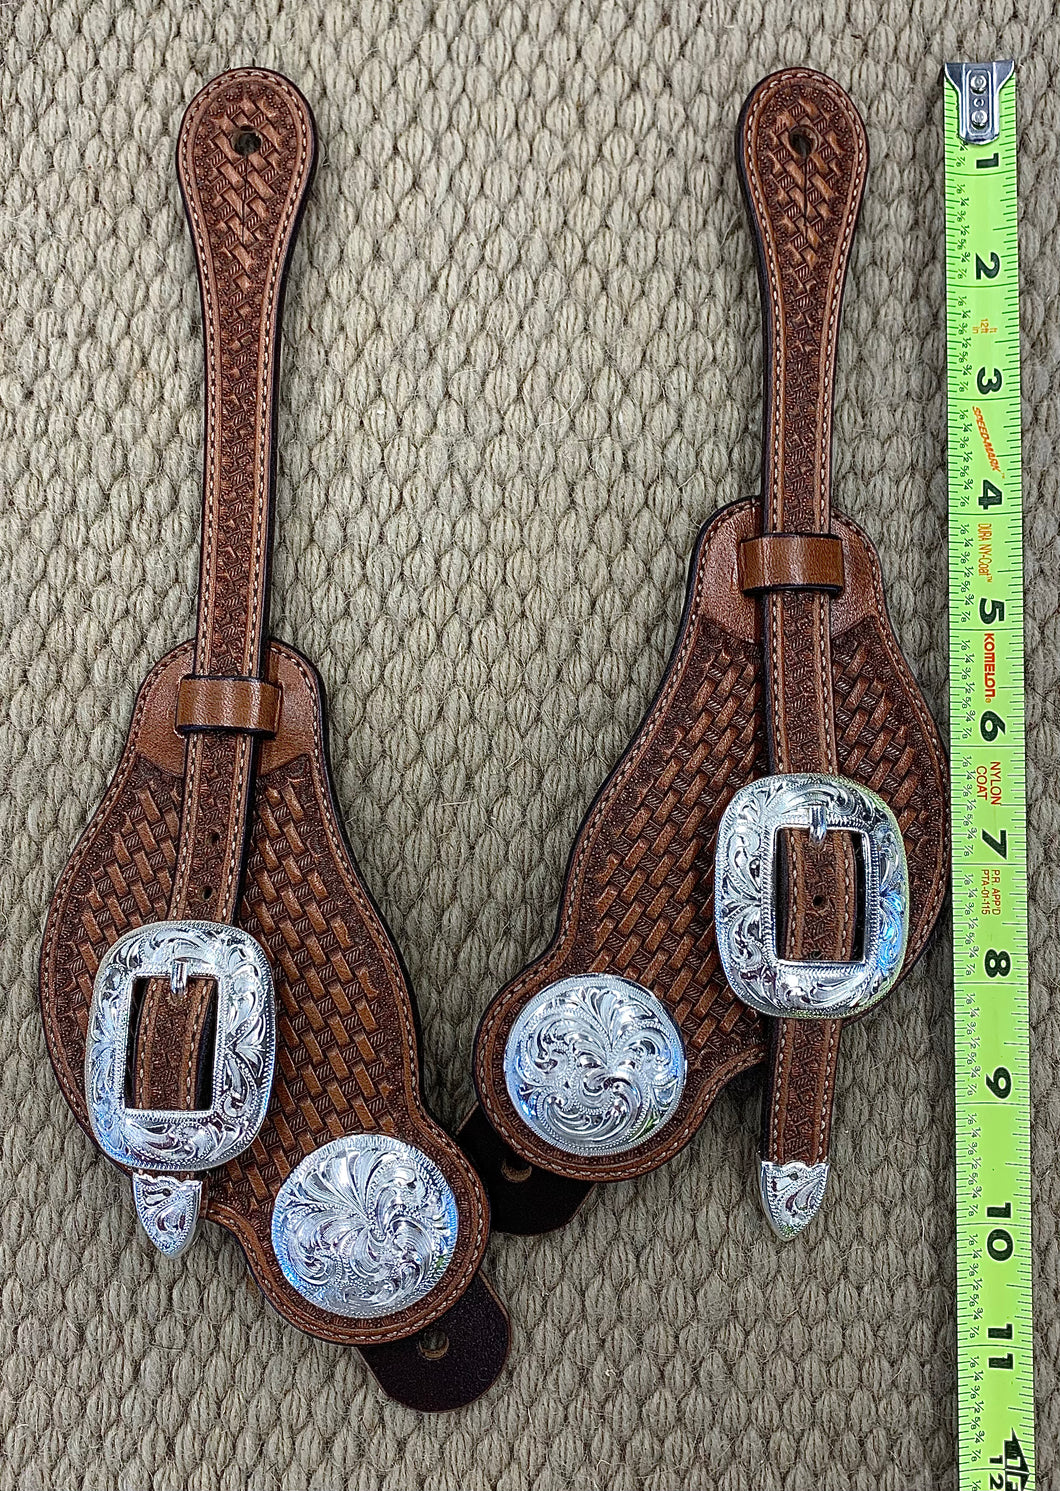 Spur Straps - SPS16 - Men's Buckaroo Basket Antiqued w/ Silver Plated Conchos and Buckles